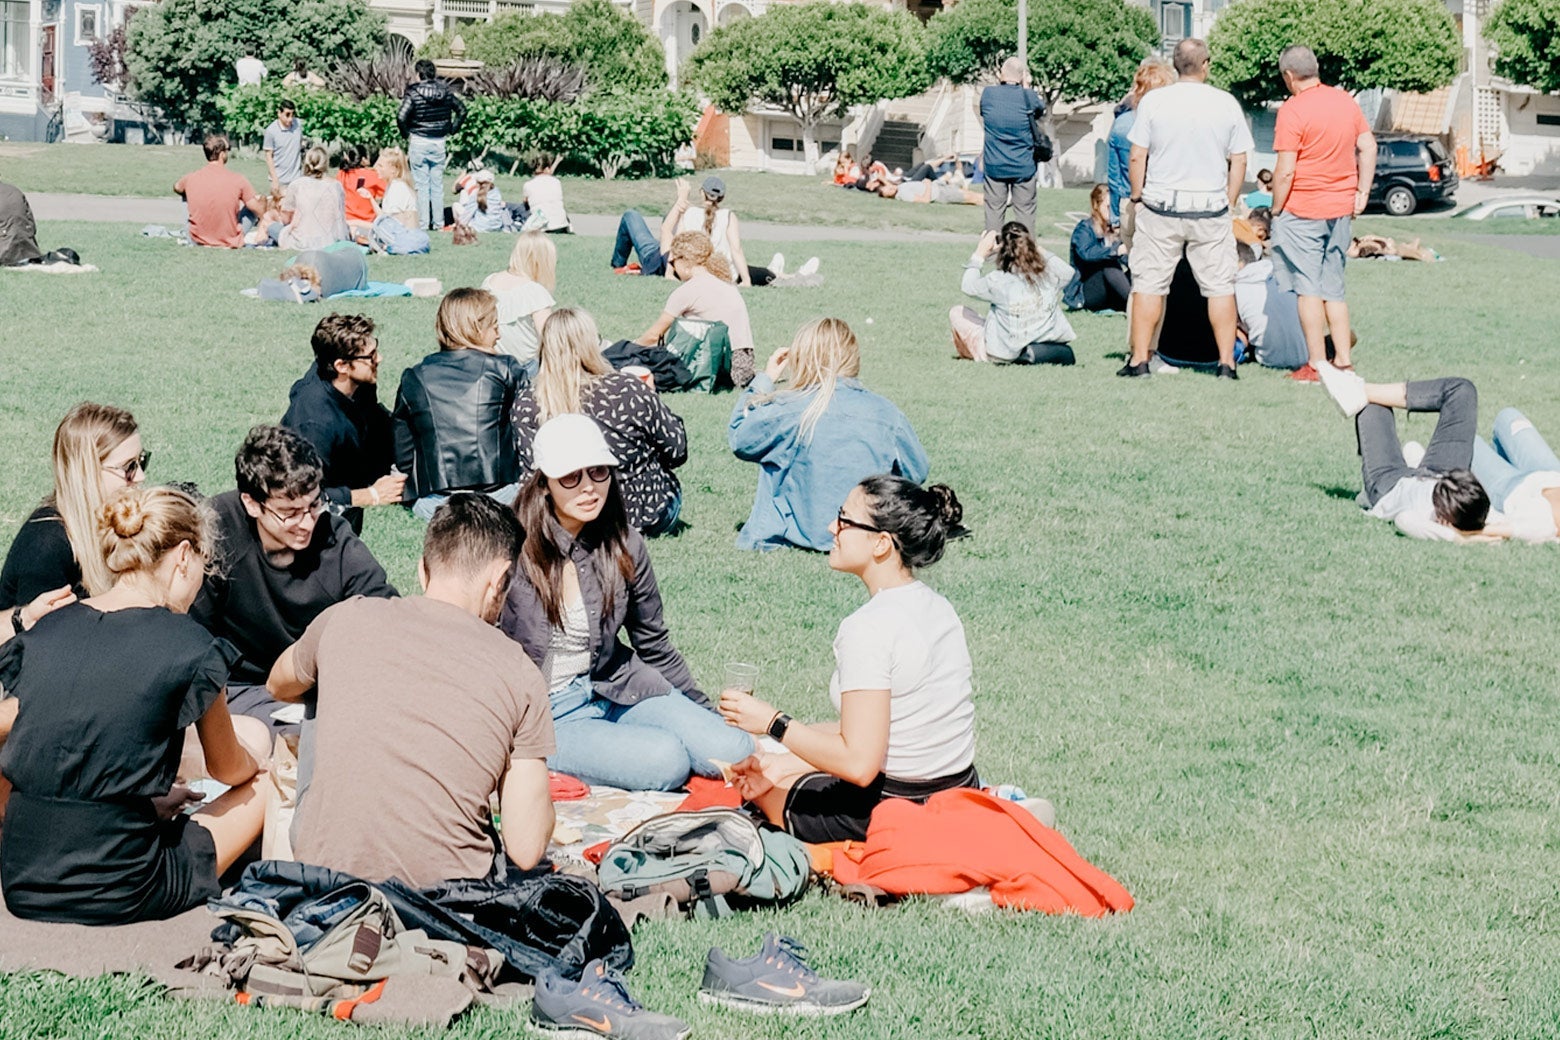 Groups of people sitting on blankets at a park.